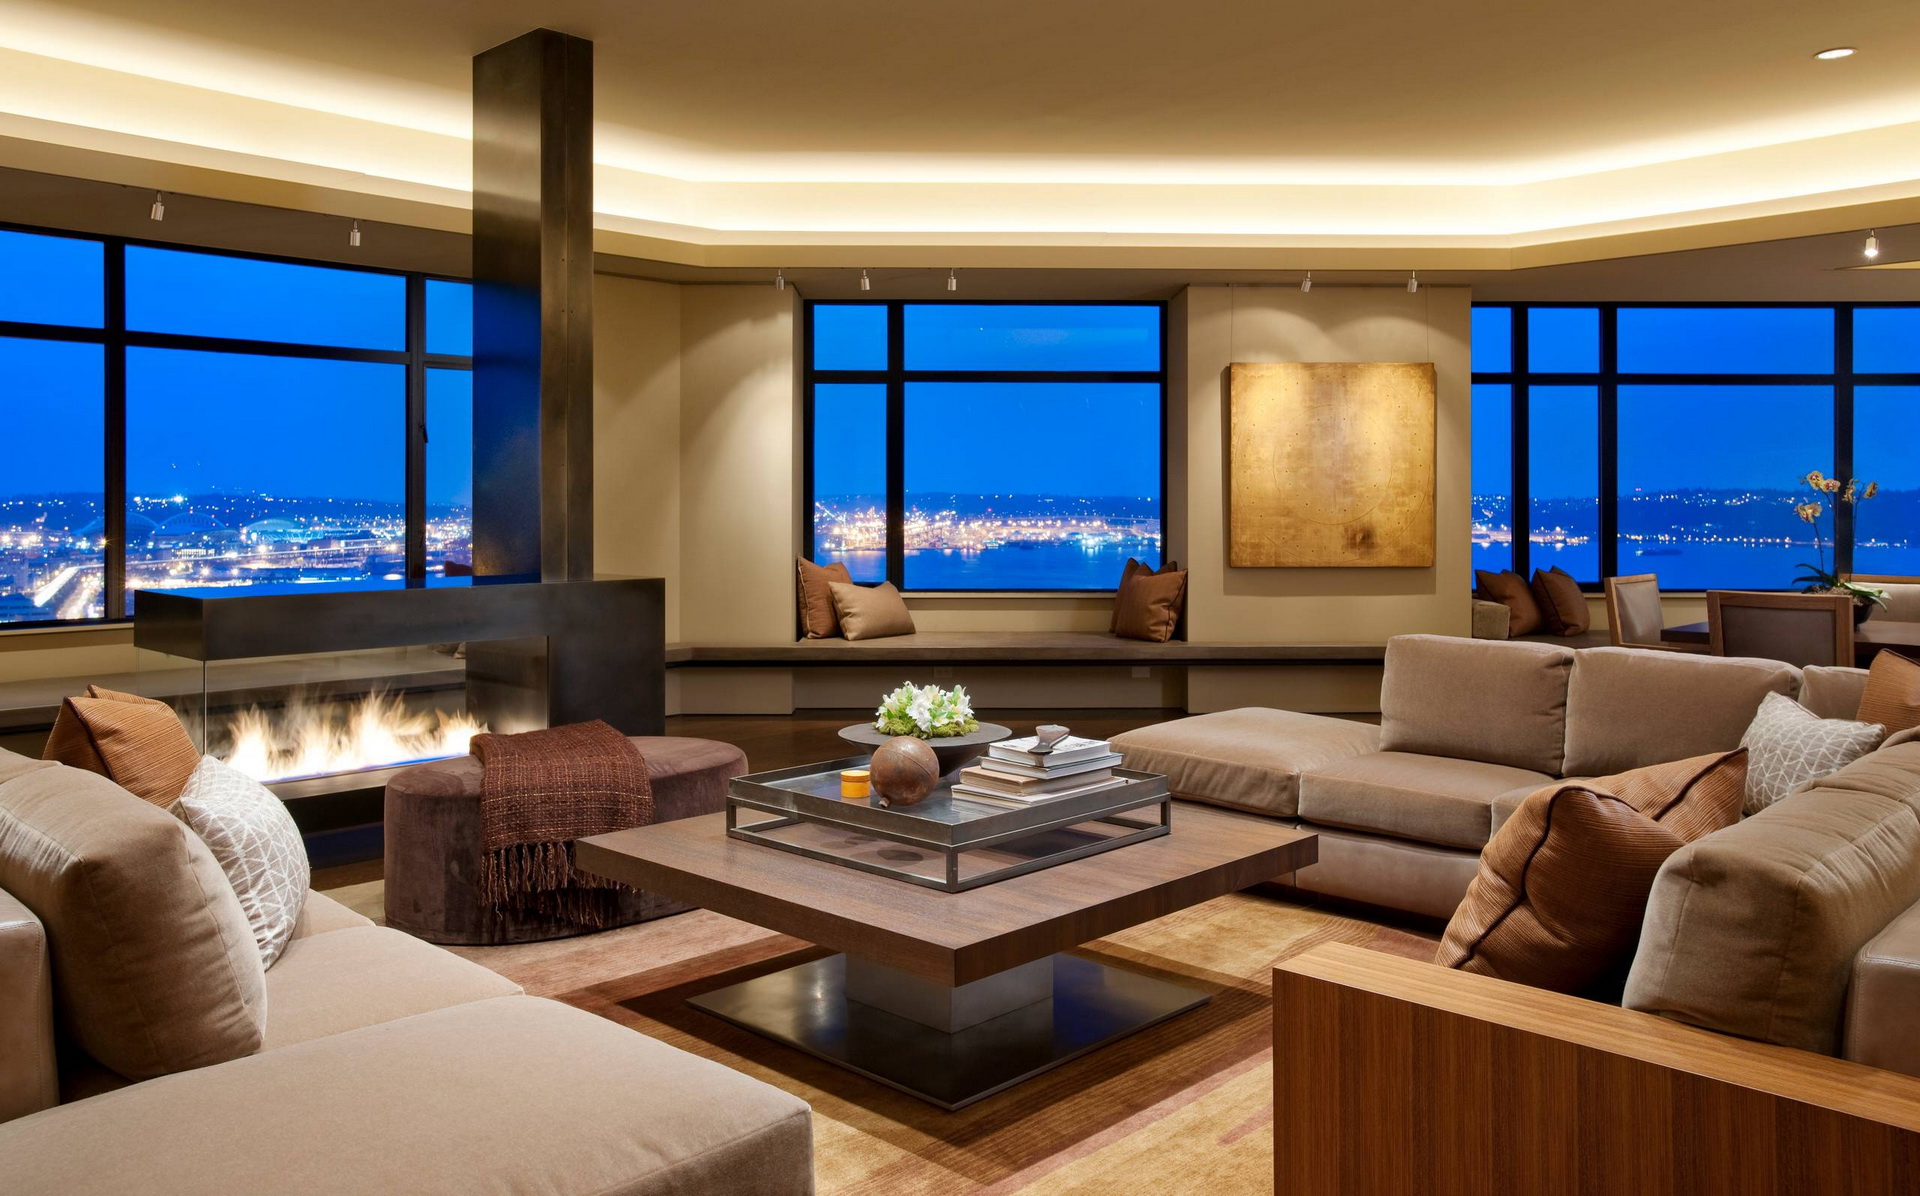 The Most Beautiful Living Room Ever